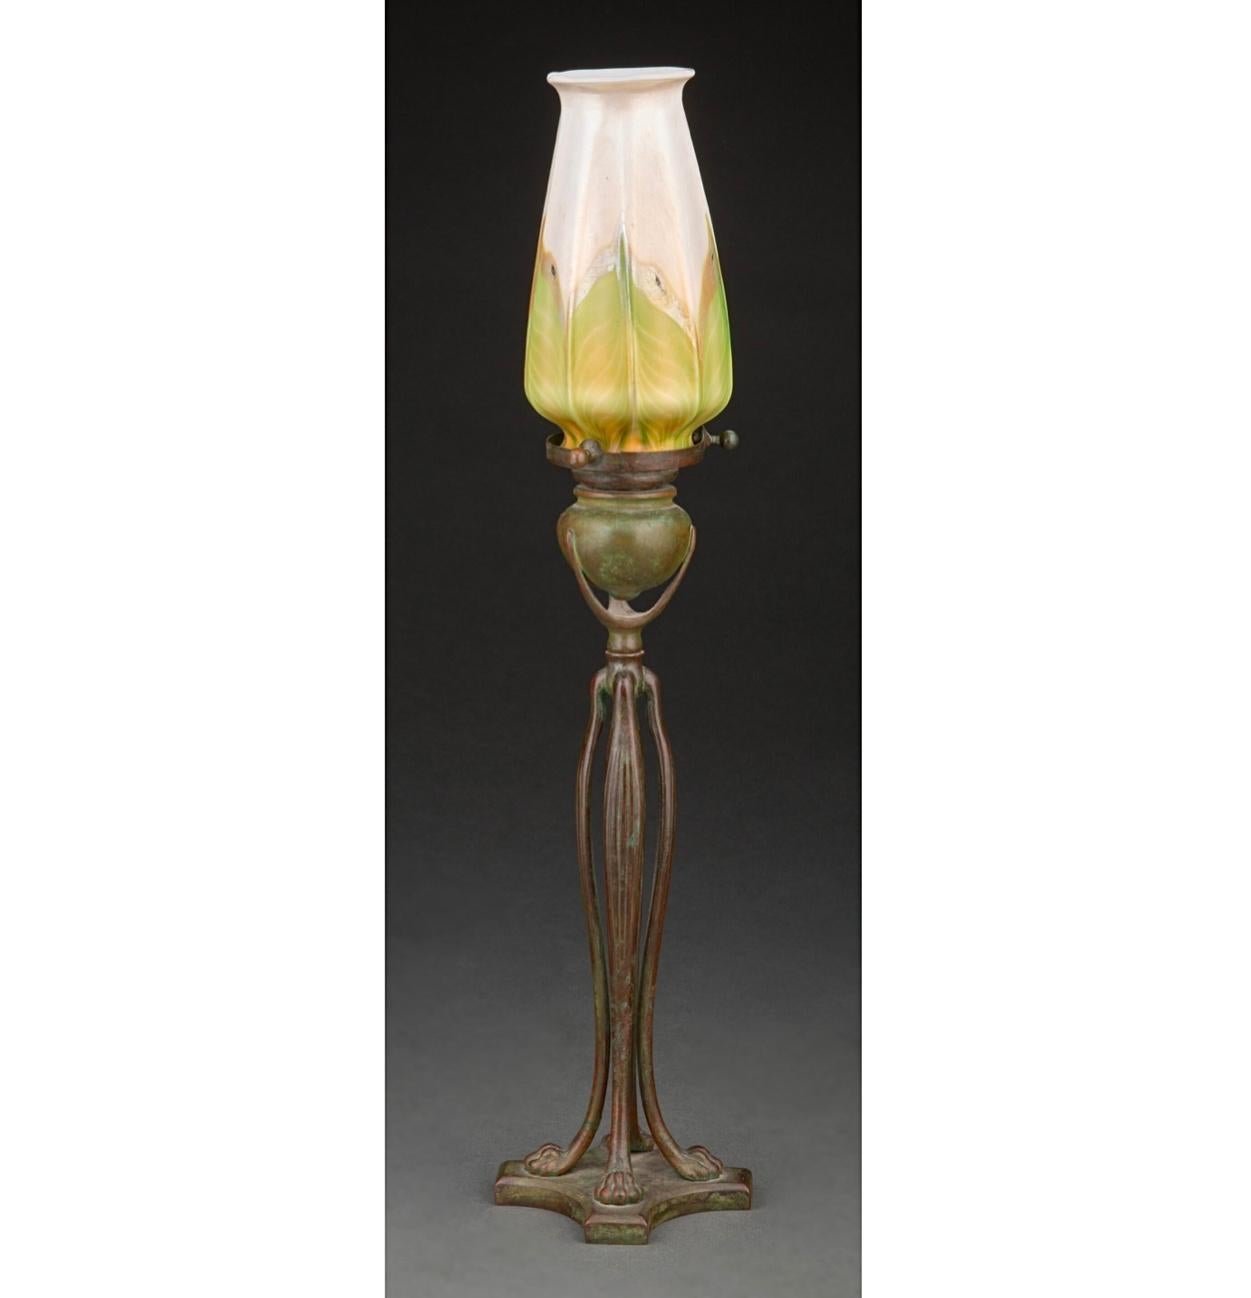 Tiffany Studios Pulled feather favrile glass and bronze candlestick lamp, circa 1910 A lovely Art Nouveau candelabra with a early decorated L.C.T Tiffany glass shade. This ensemble will adorn your living room, study, library or bedroom